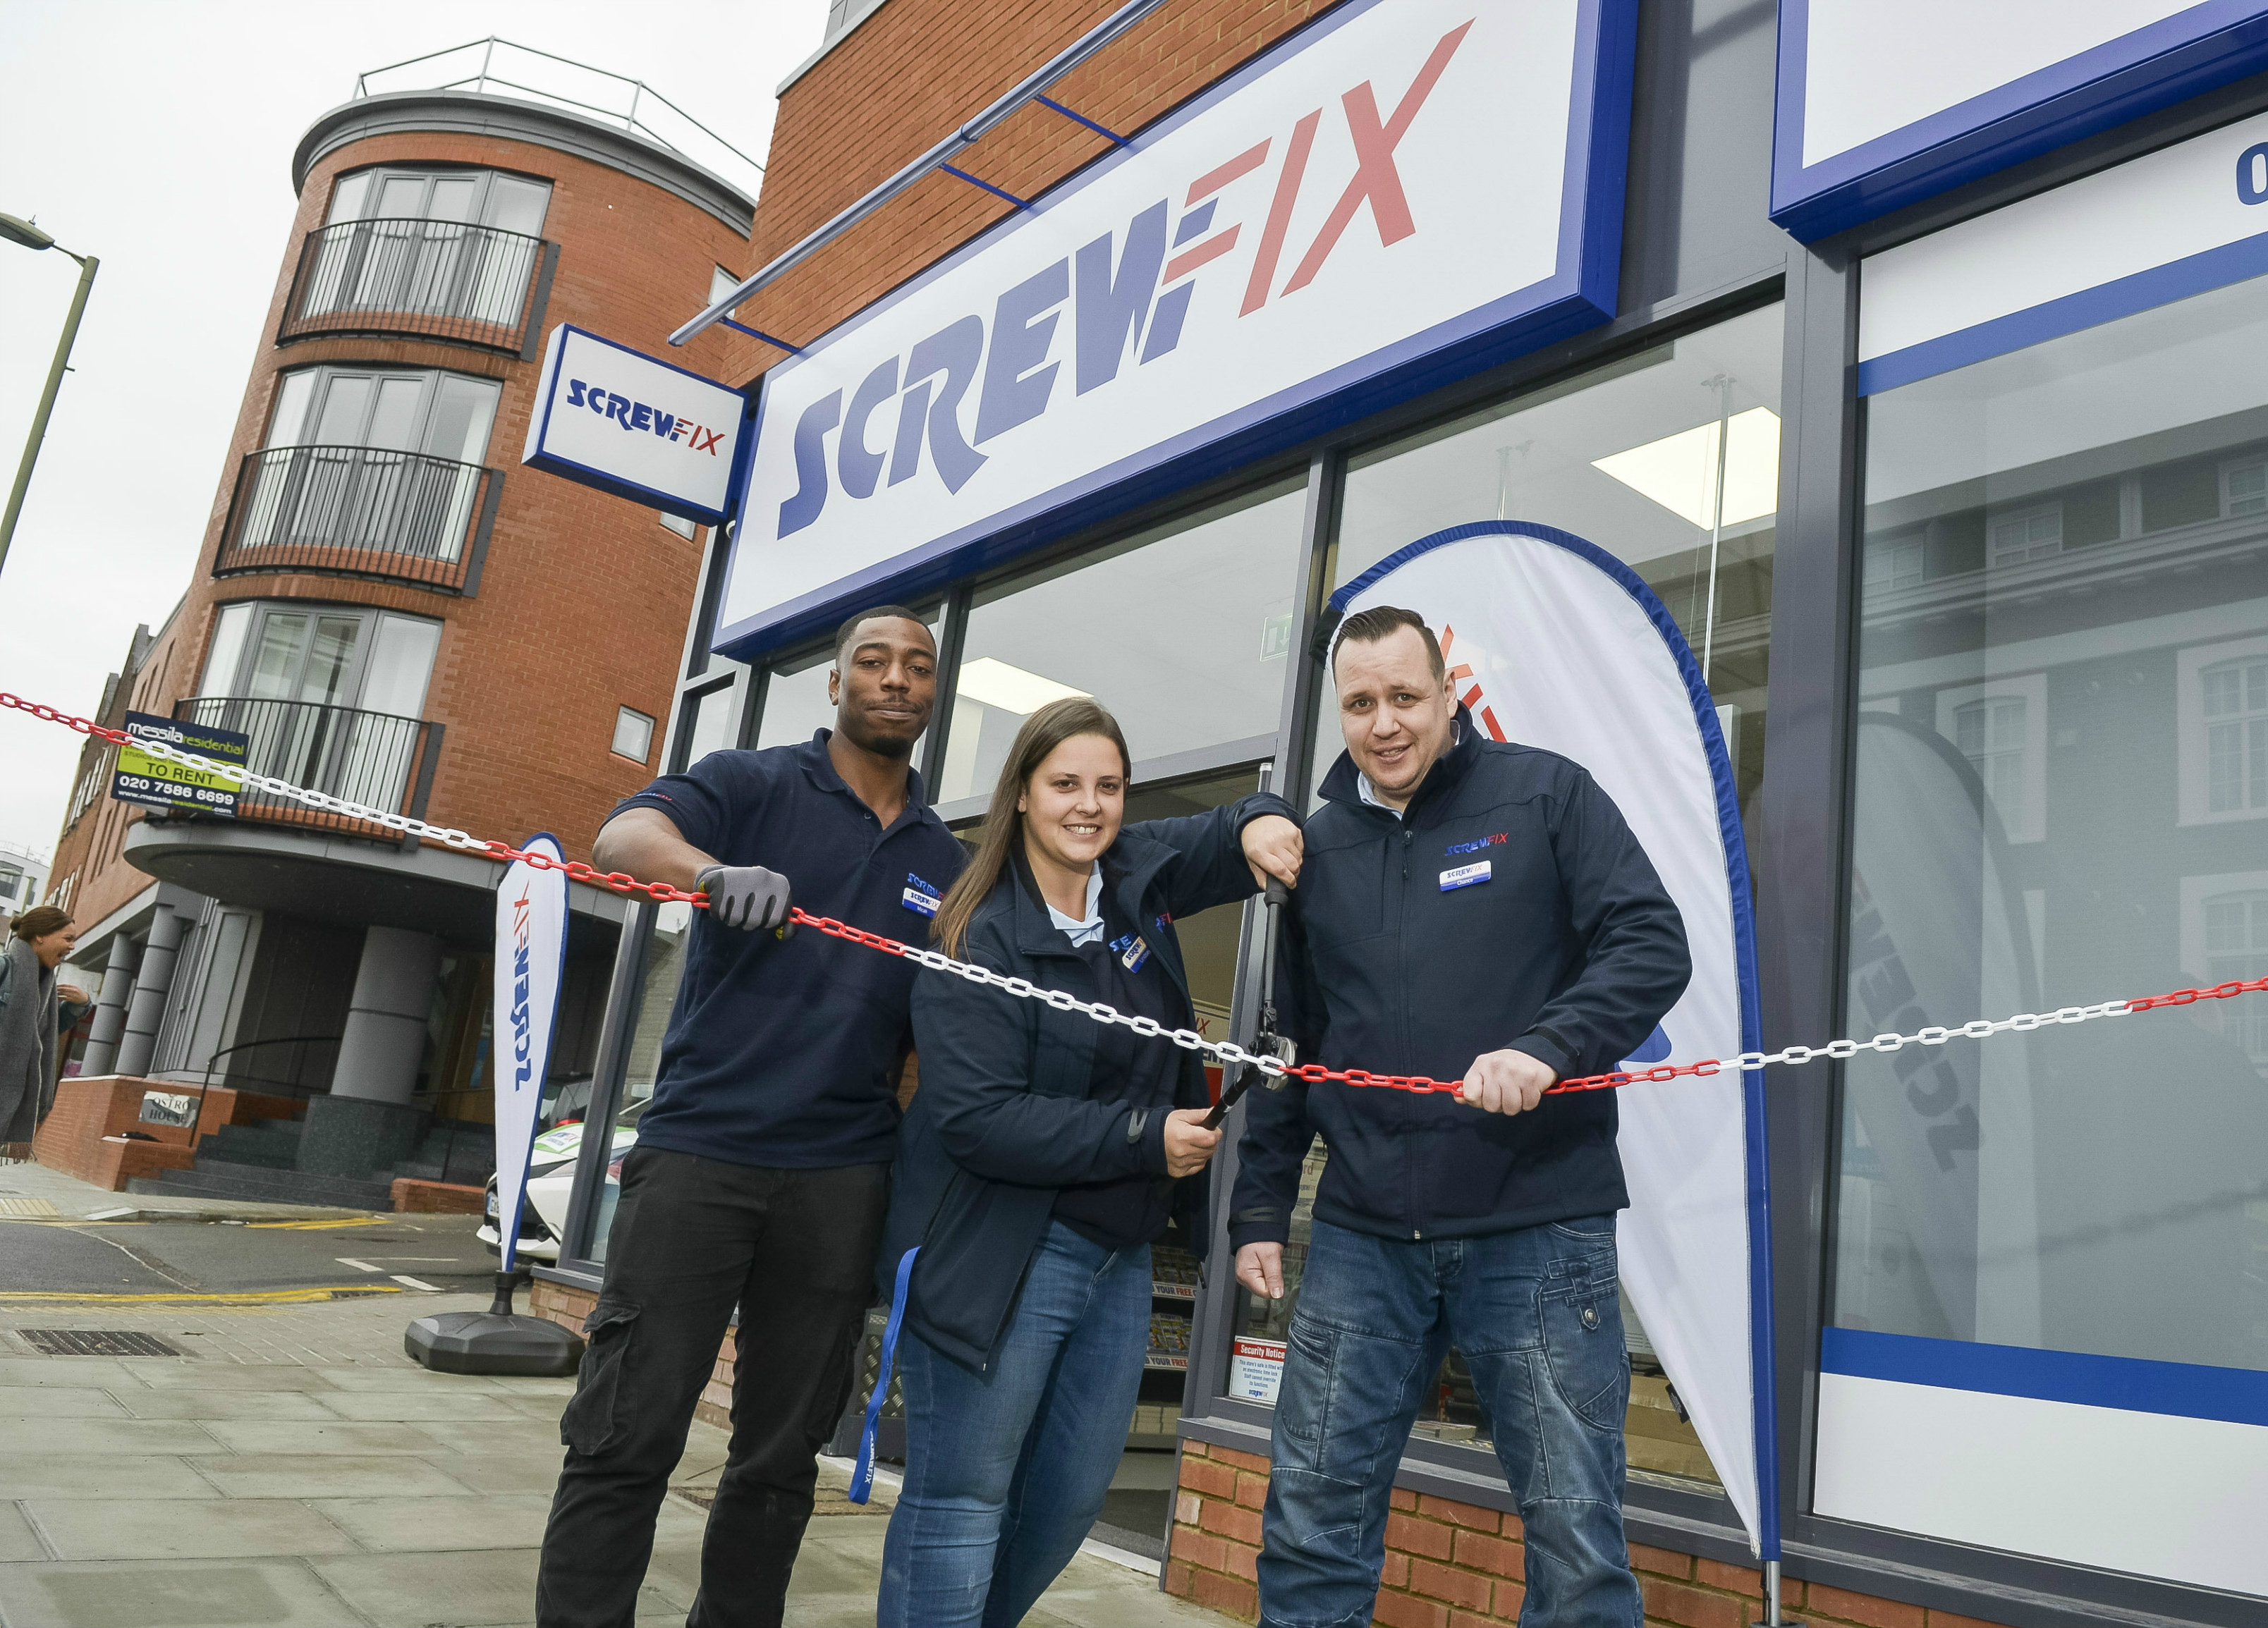 Screwfix welcomes hundreds of customers as two new stores in North London open